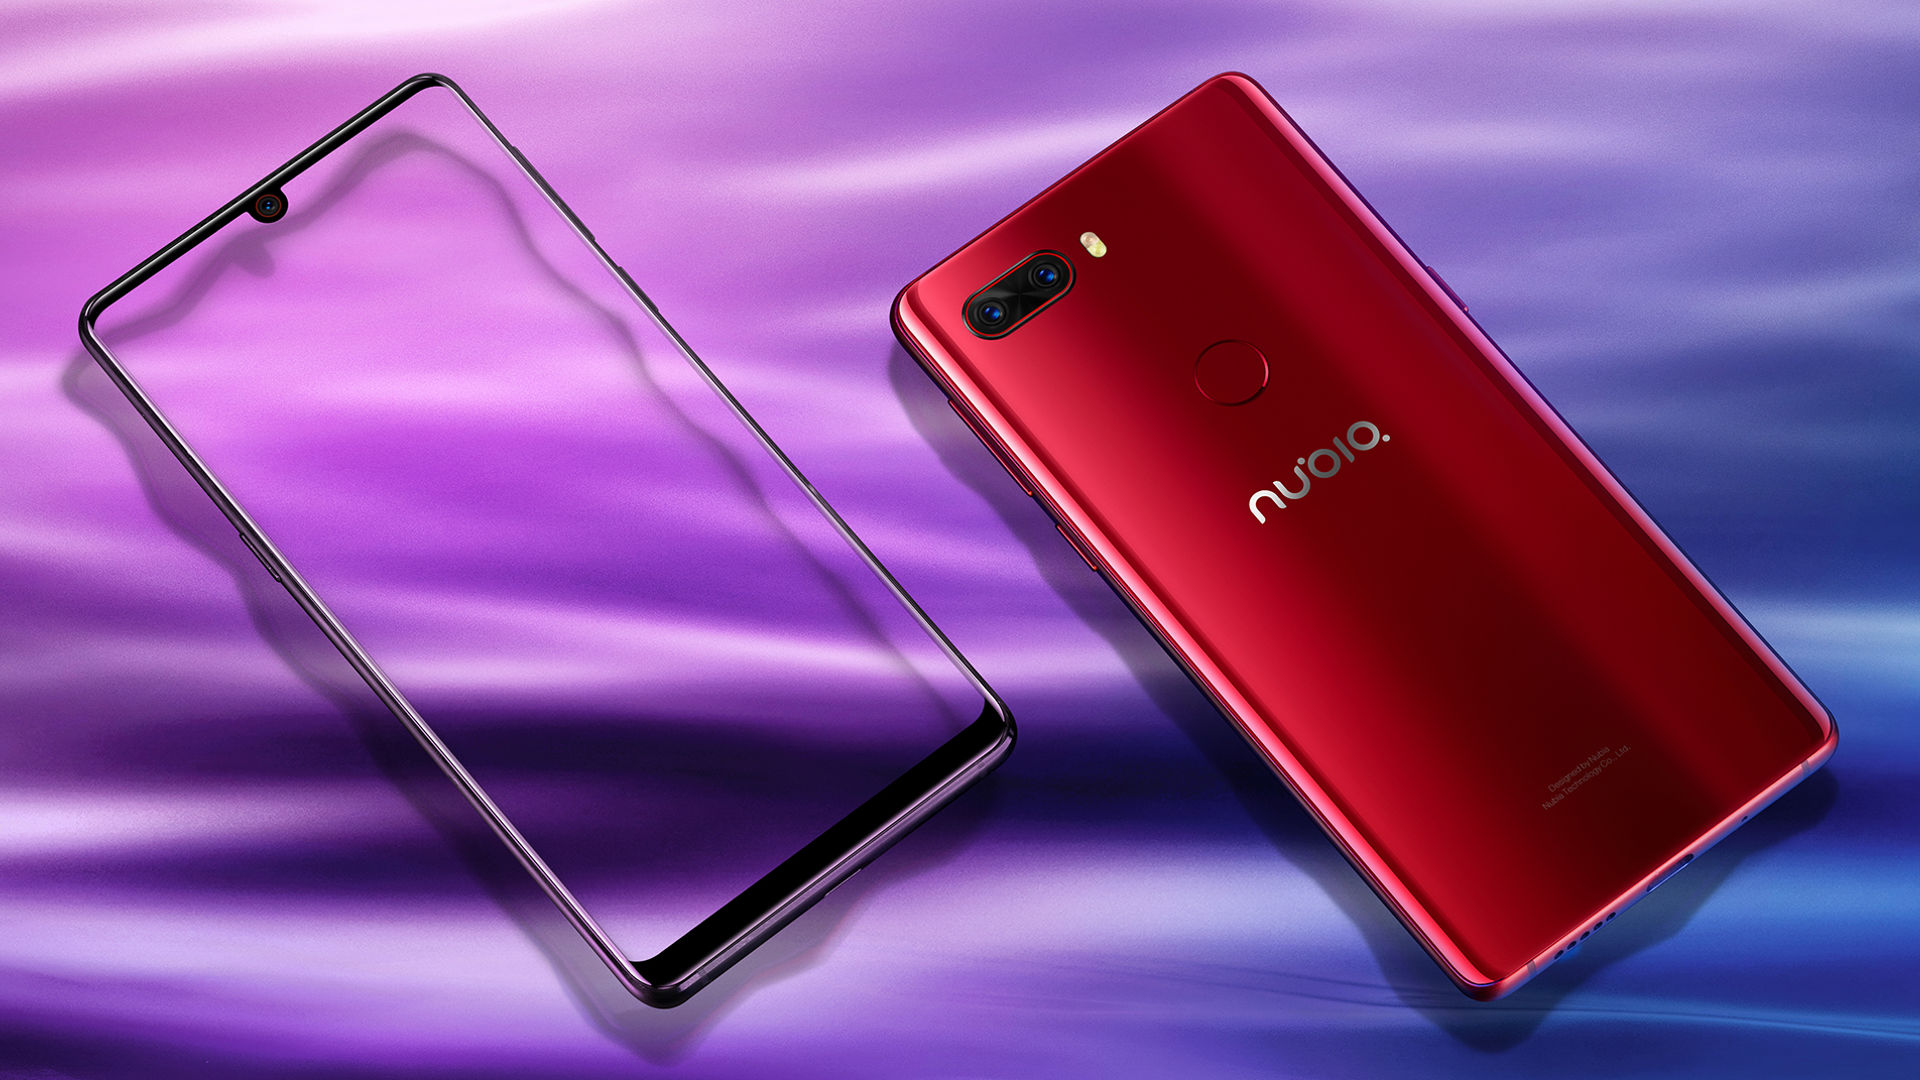 The nubia Z18 in red.